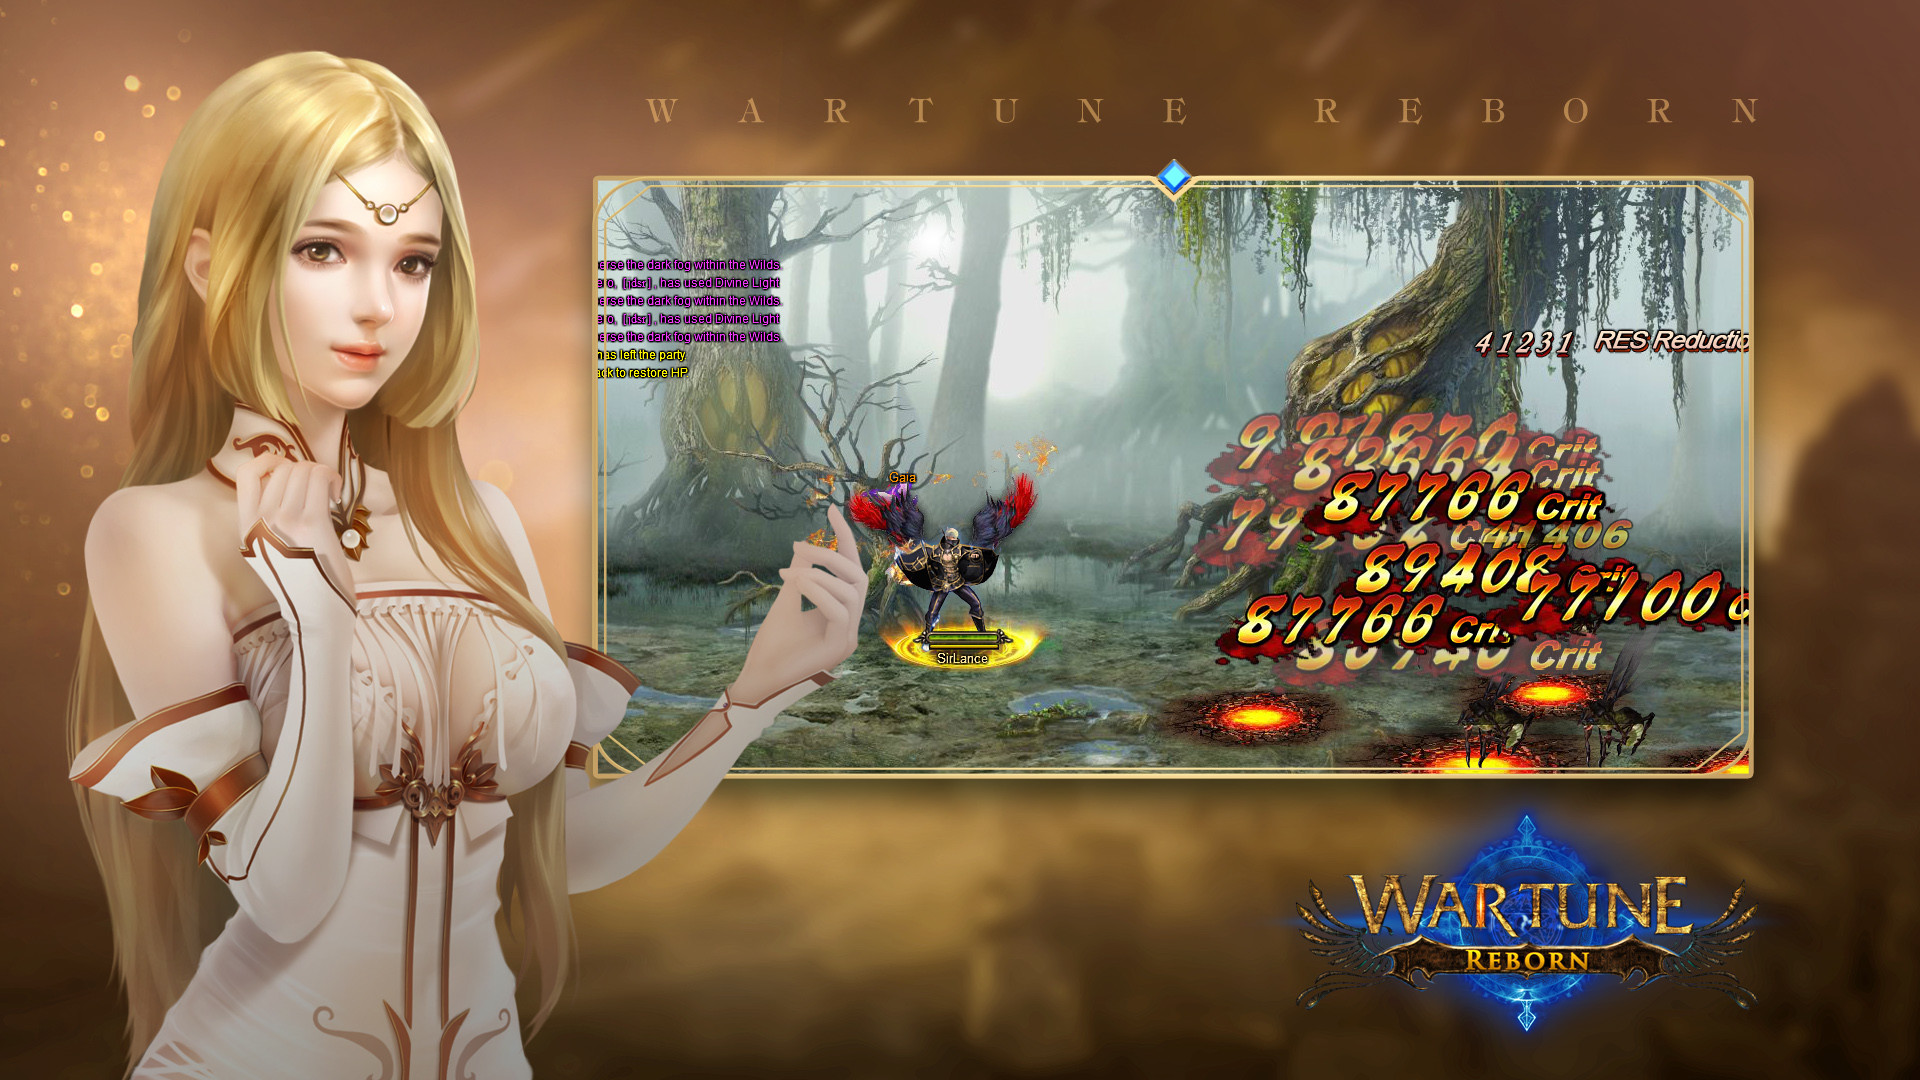 activation code packs for wartune reborn